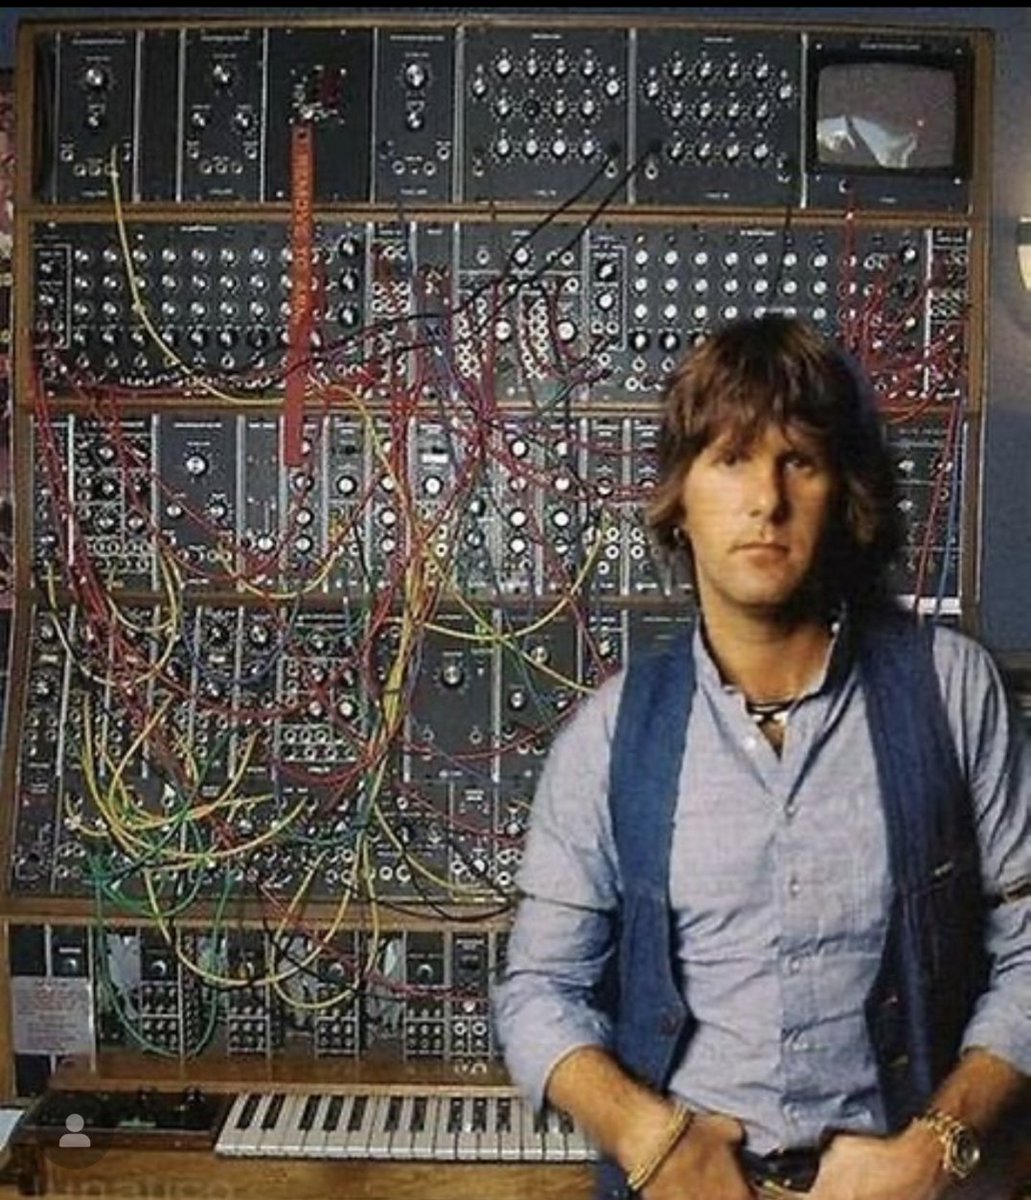 Today we commemorate the birthday of the world's most gifted keyboardplayer, #Keith_Emerson. Please take a moment to remember and honor this amazing person. We miss you.